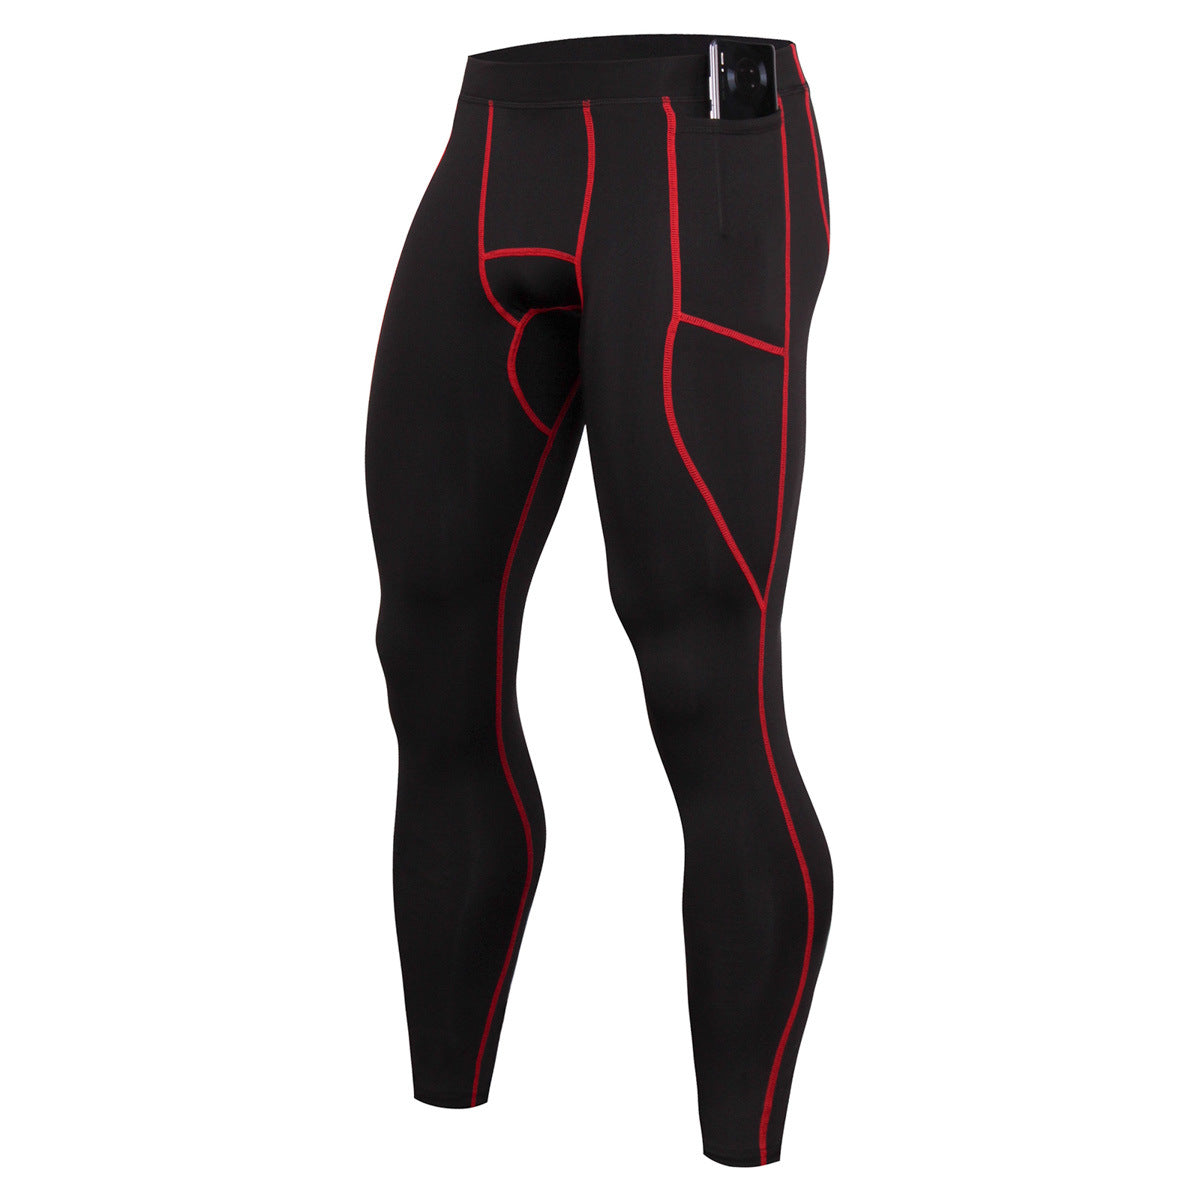 Men's Sport Fitness Compression Gear with Pockets